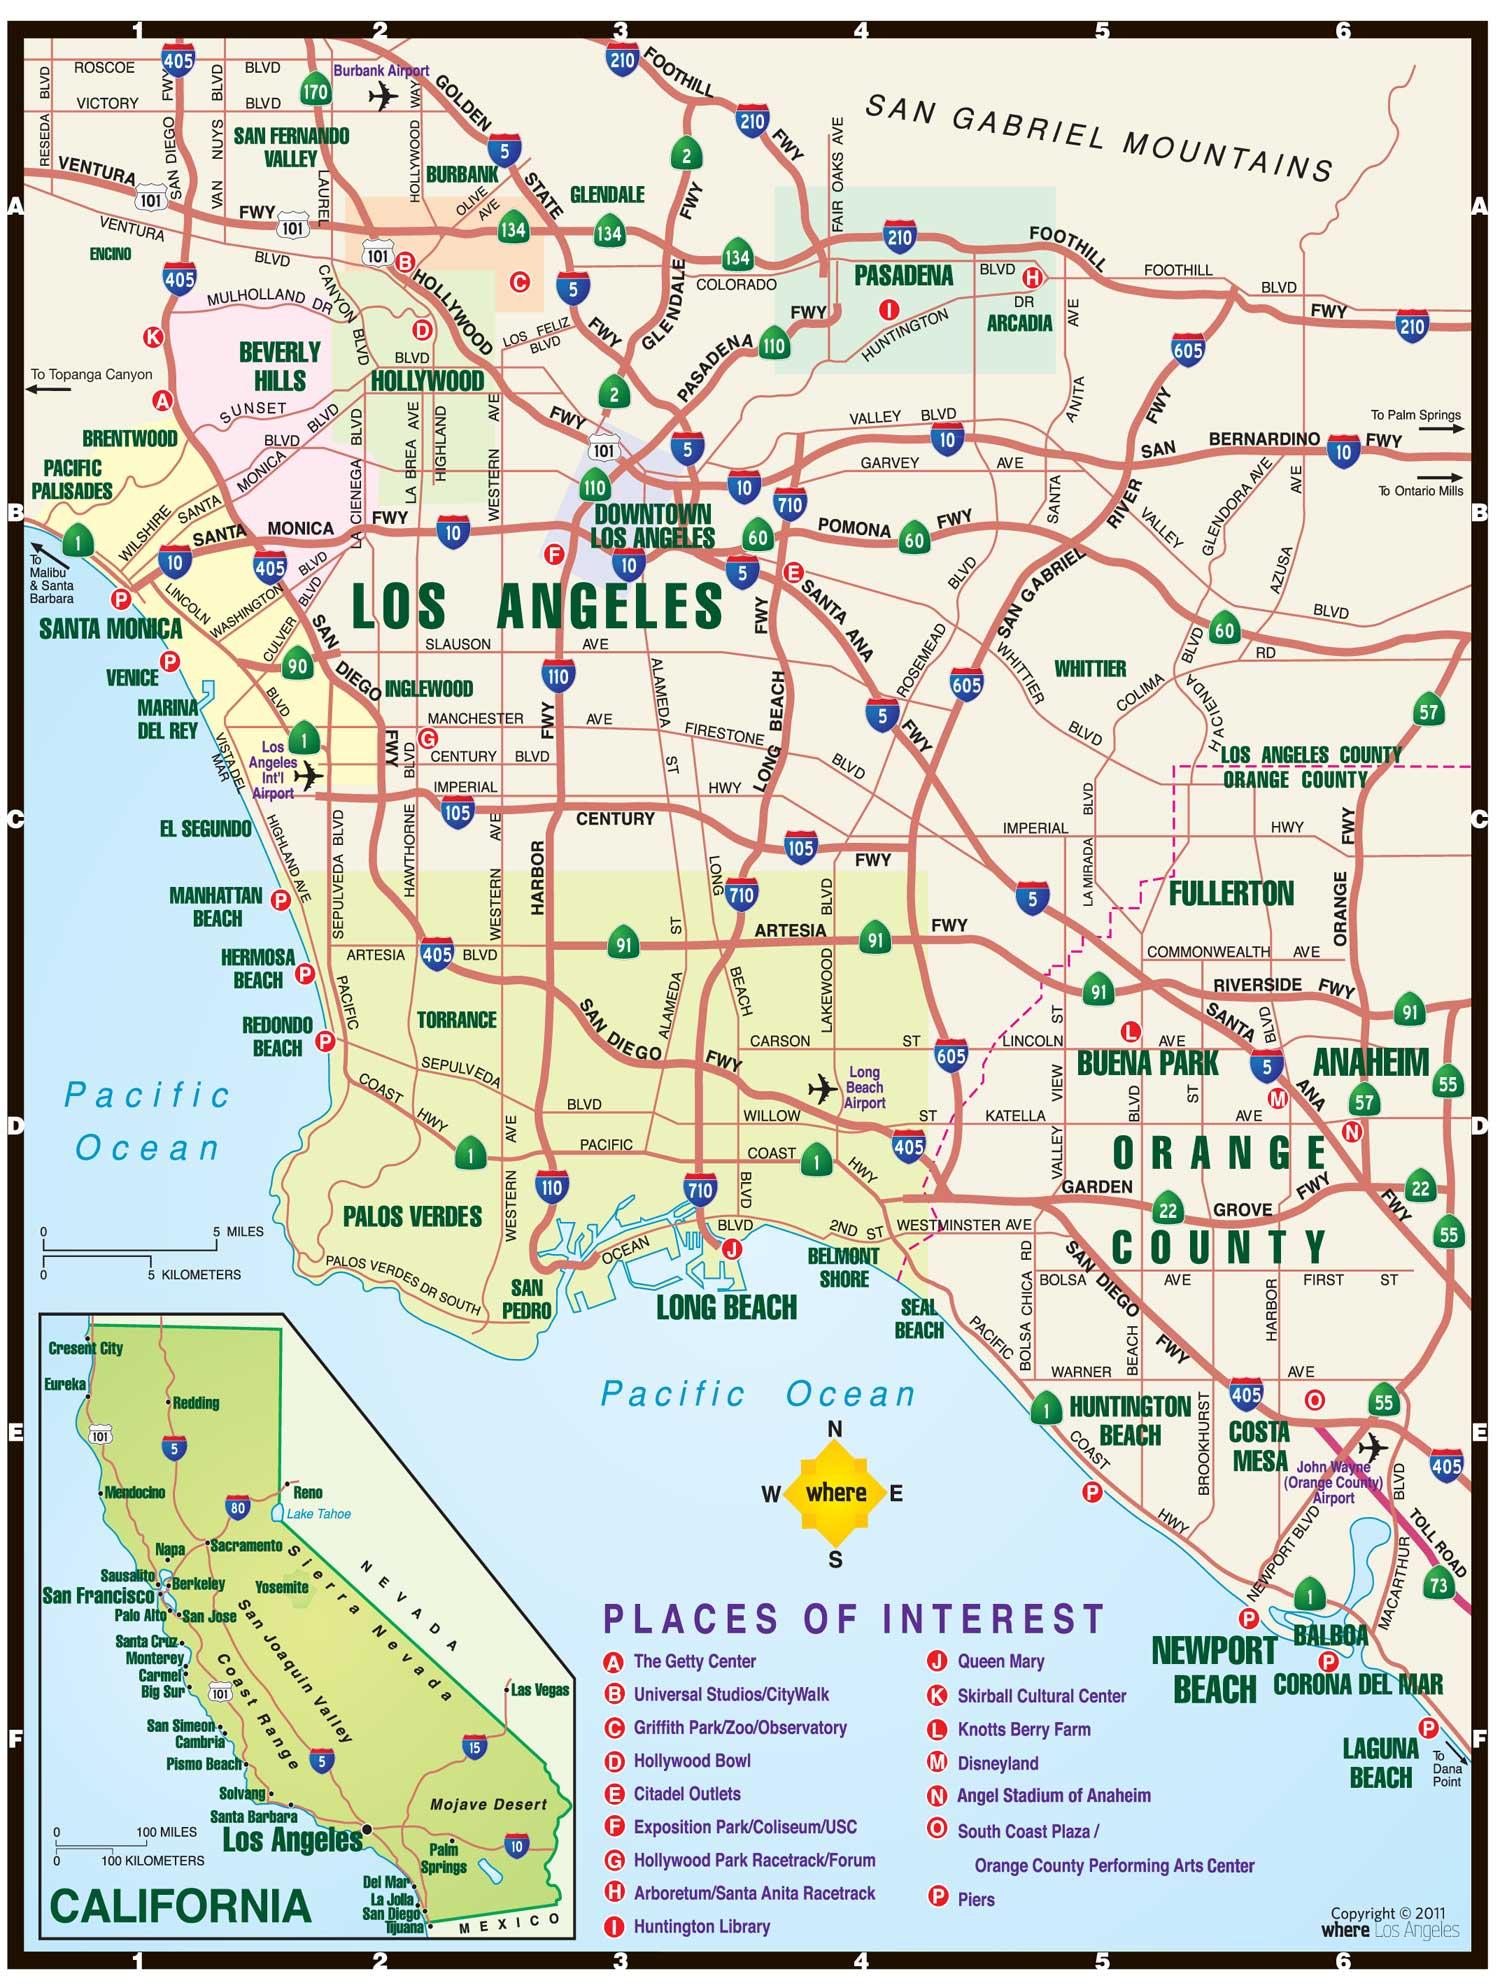 los angeles toll roads map - map of los angeles toll roads